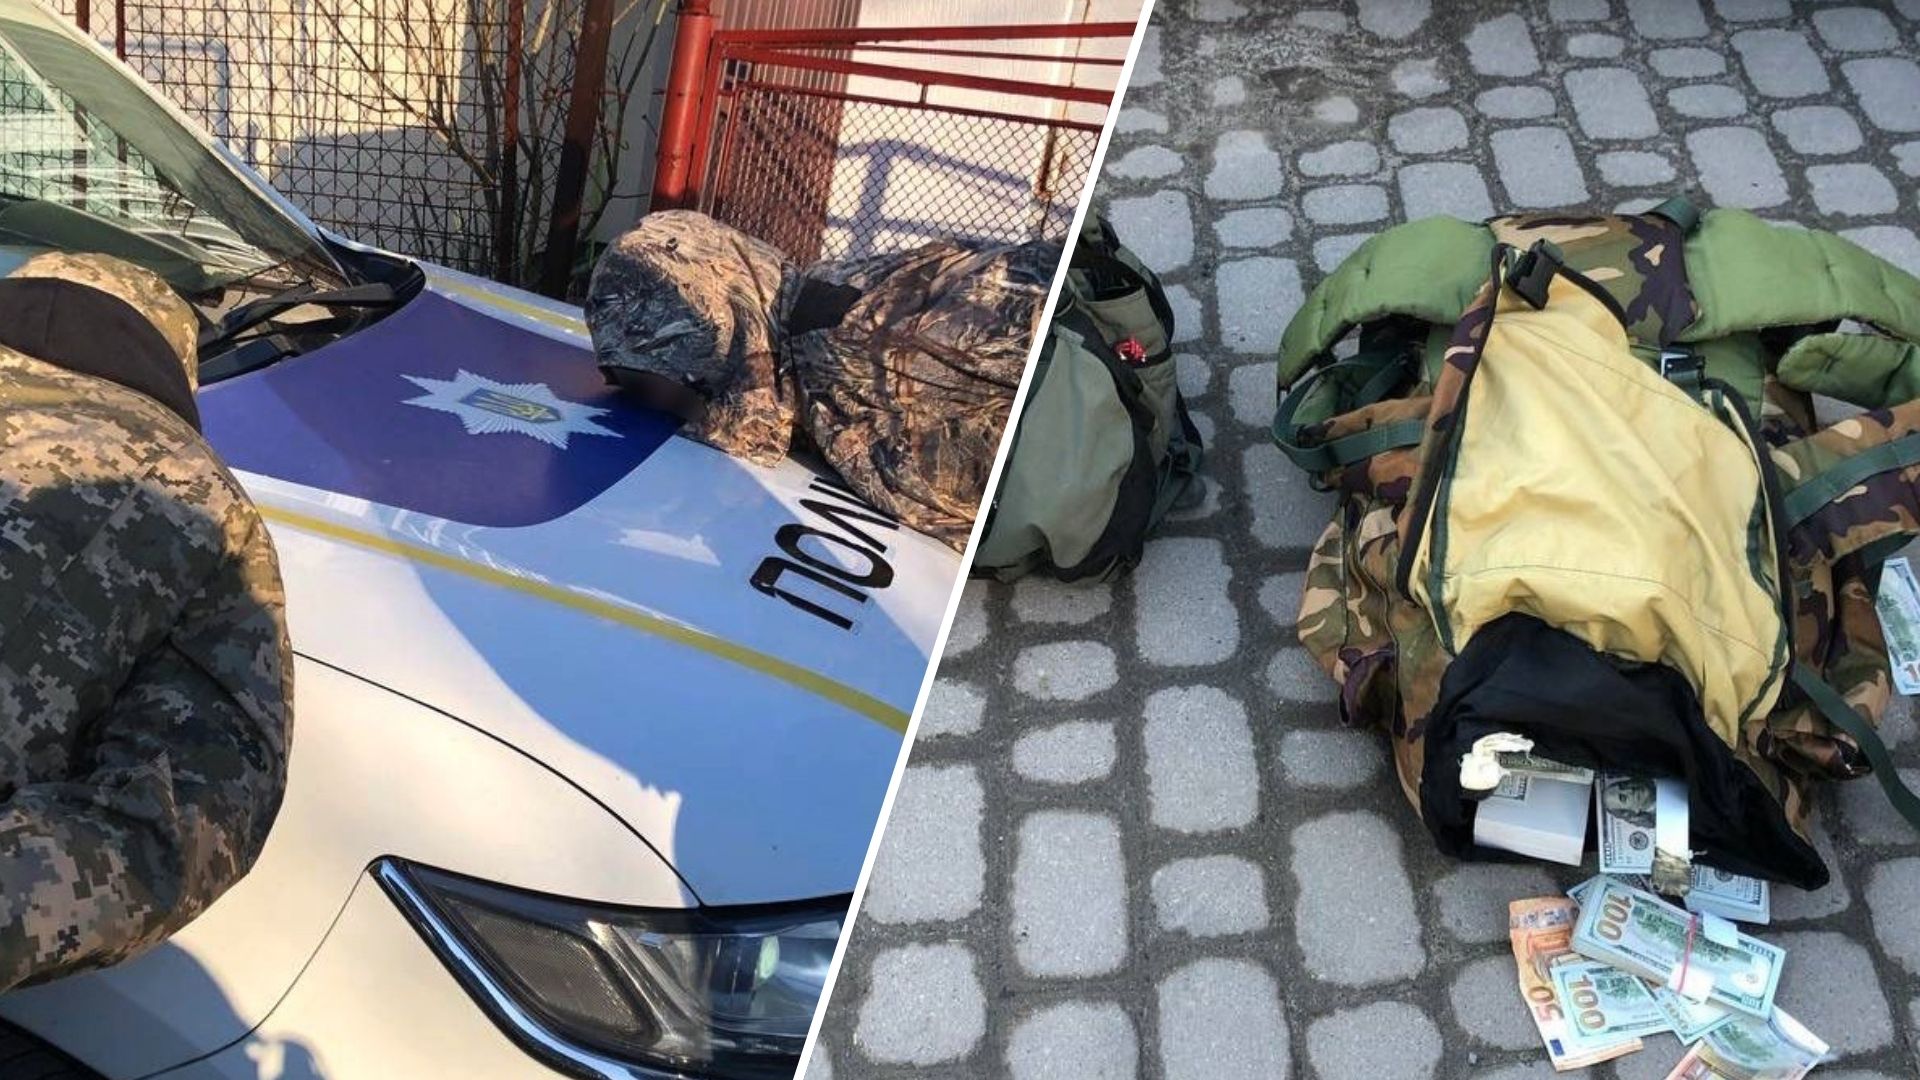 In Lviv, police detained two men suspected of theft from a bank. The attackers, a 31-year-old and a 40-year-old from Lviv, were detained on Piasecki Street after they left the bank on Volodymyr the Great Street, carrying large bags and hammers.